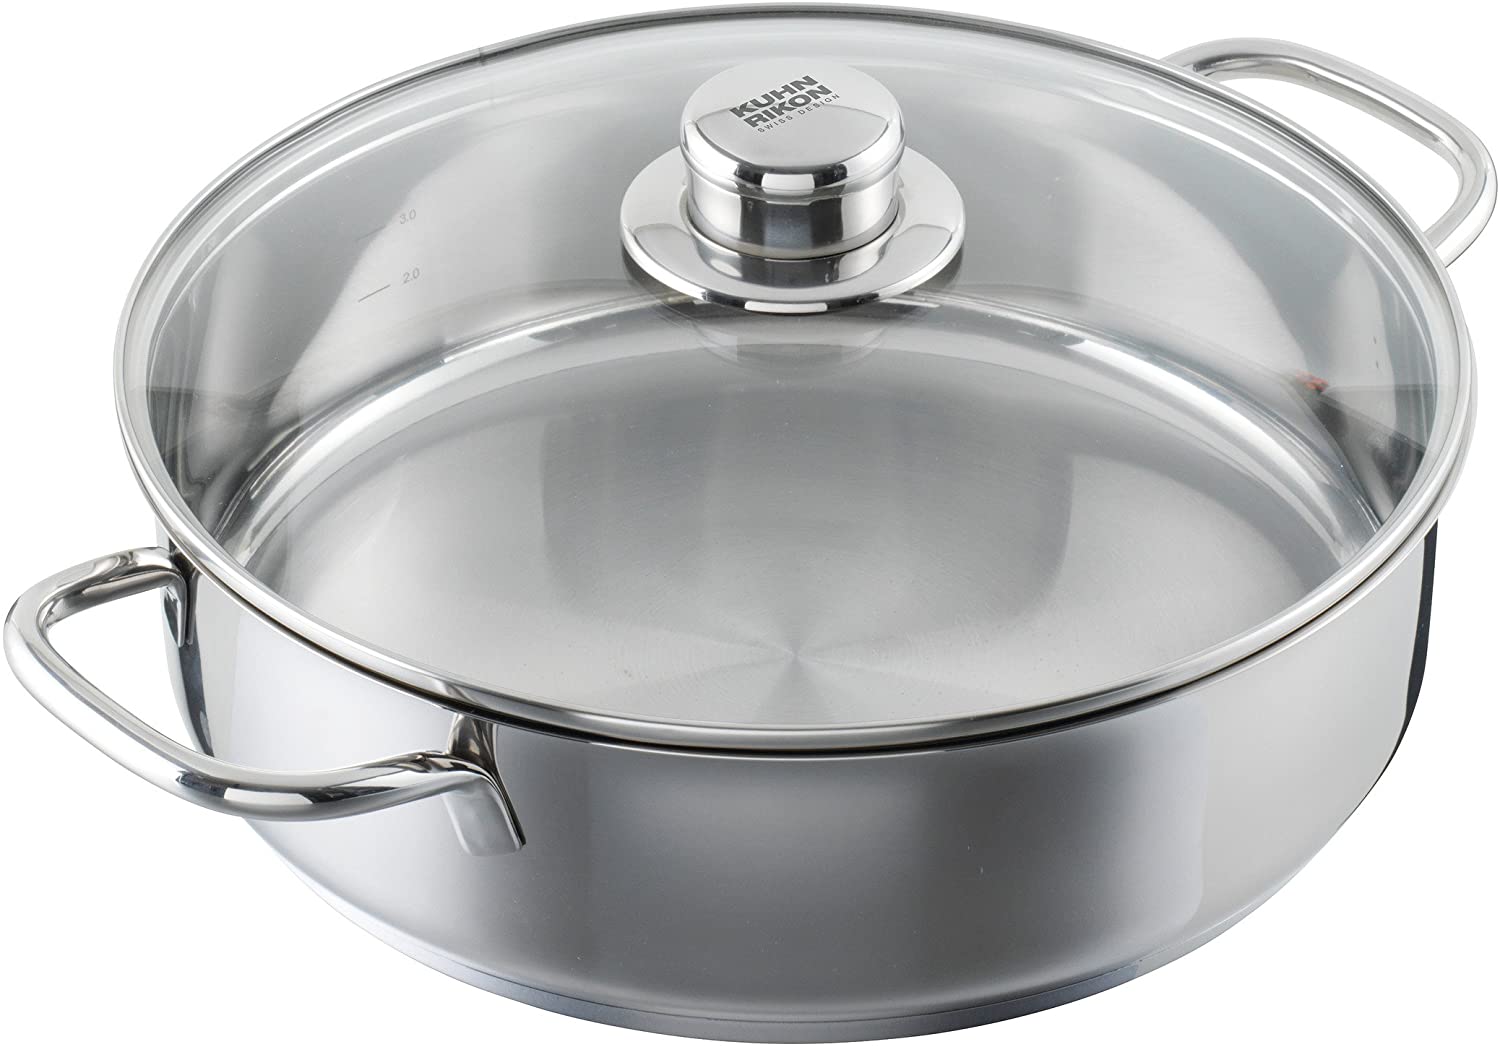 \'Kuhn Rikon 37396 \"Today 3 Litre Stainless Steel Silver, 33.5 x 26 cm x 10 cm